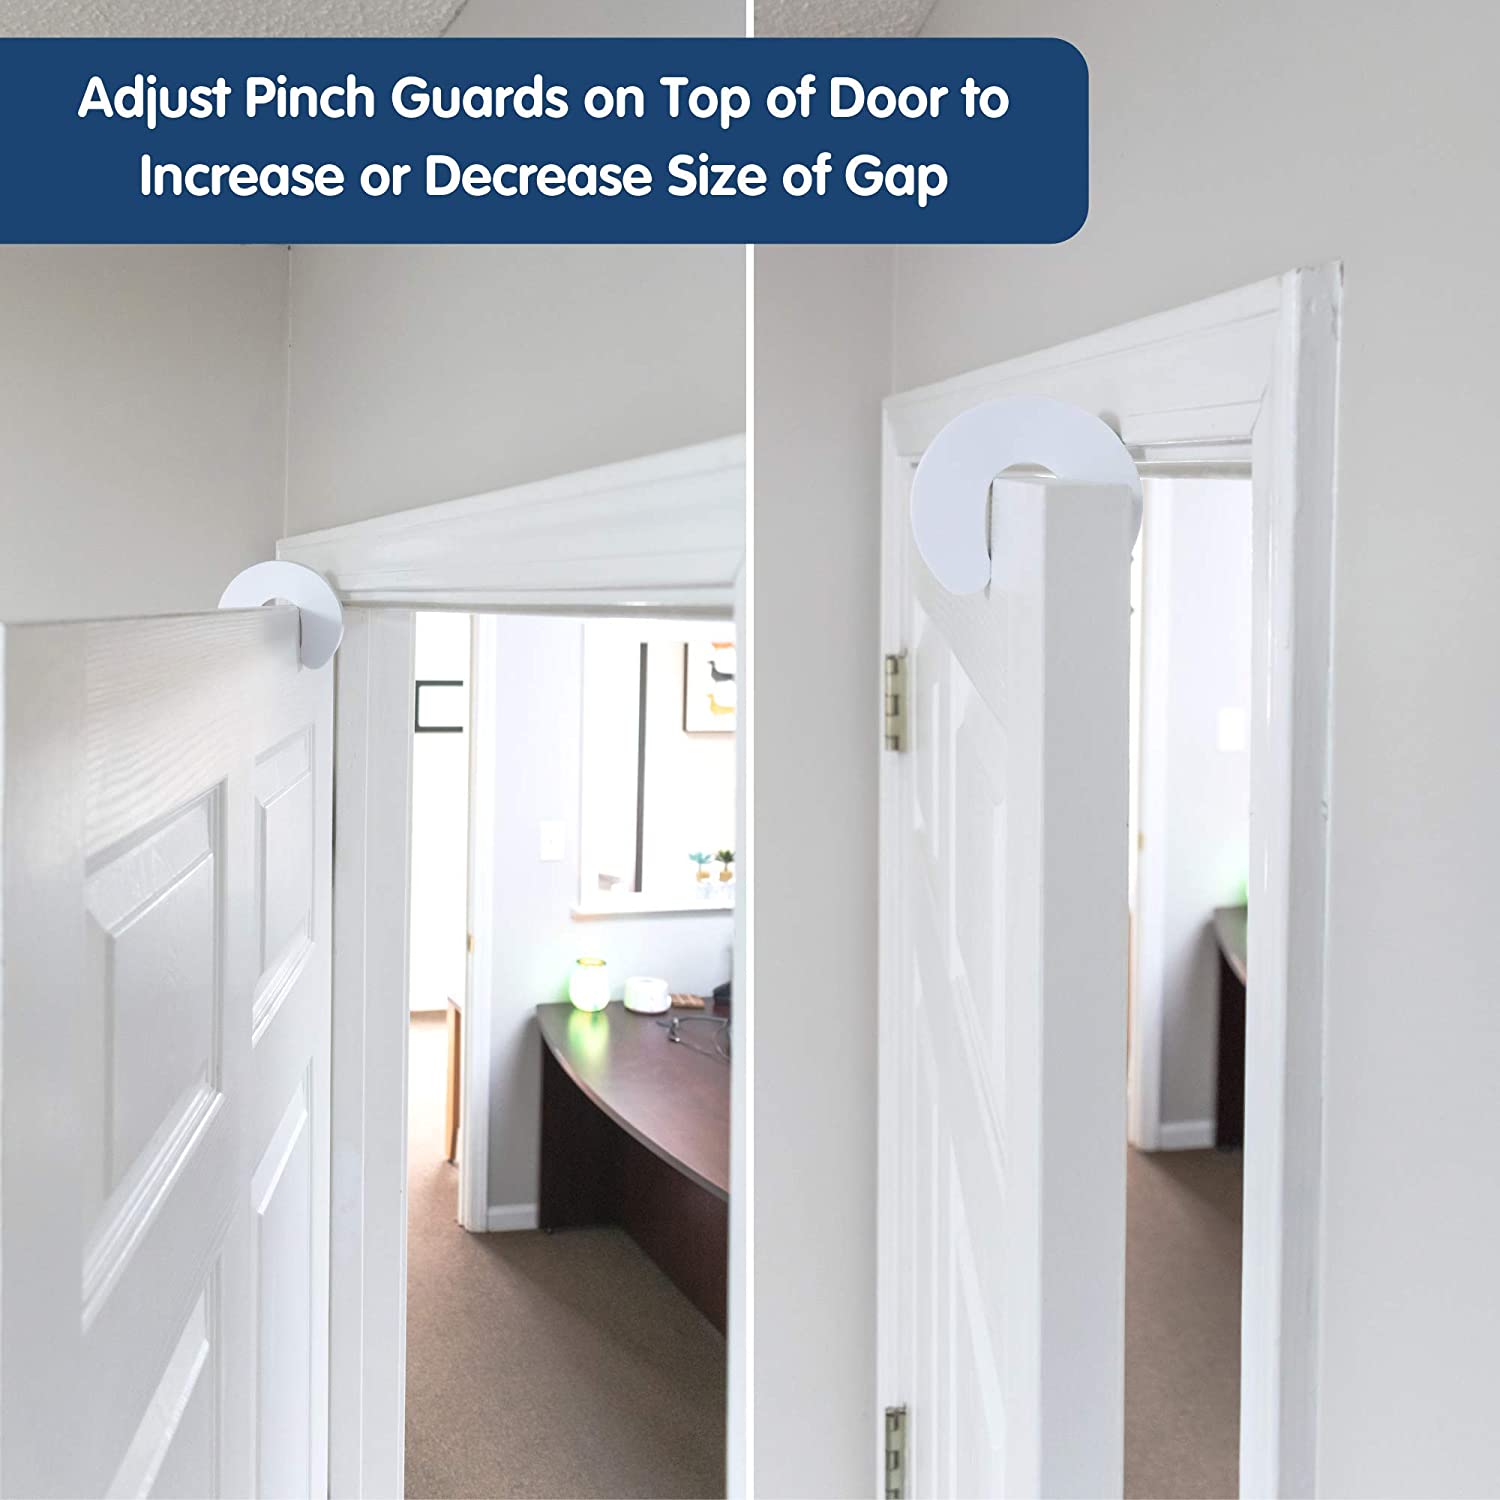 Hot Pinch Guard 4pk. Baby Proofing Doors Made Easy with Soft Yet Durable Foam Door Stopper. Prevents Finger Pinch Injuries